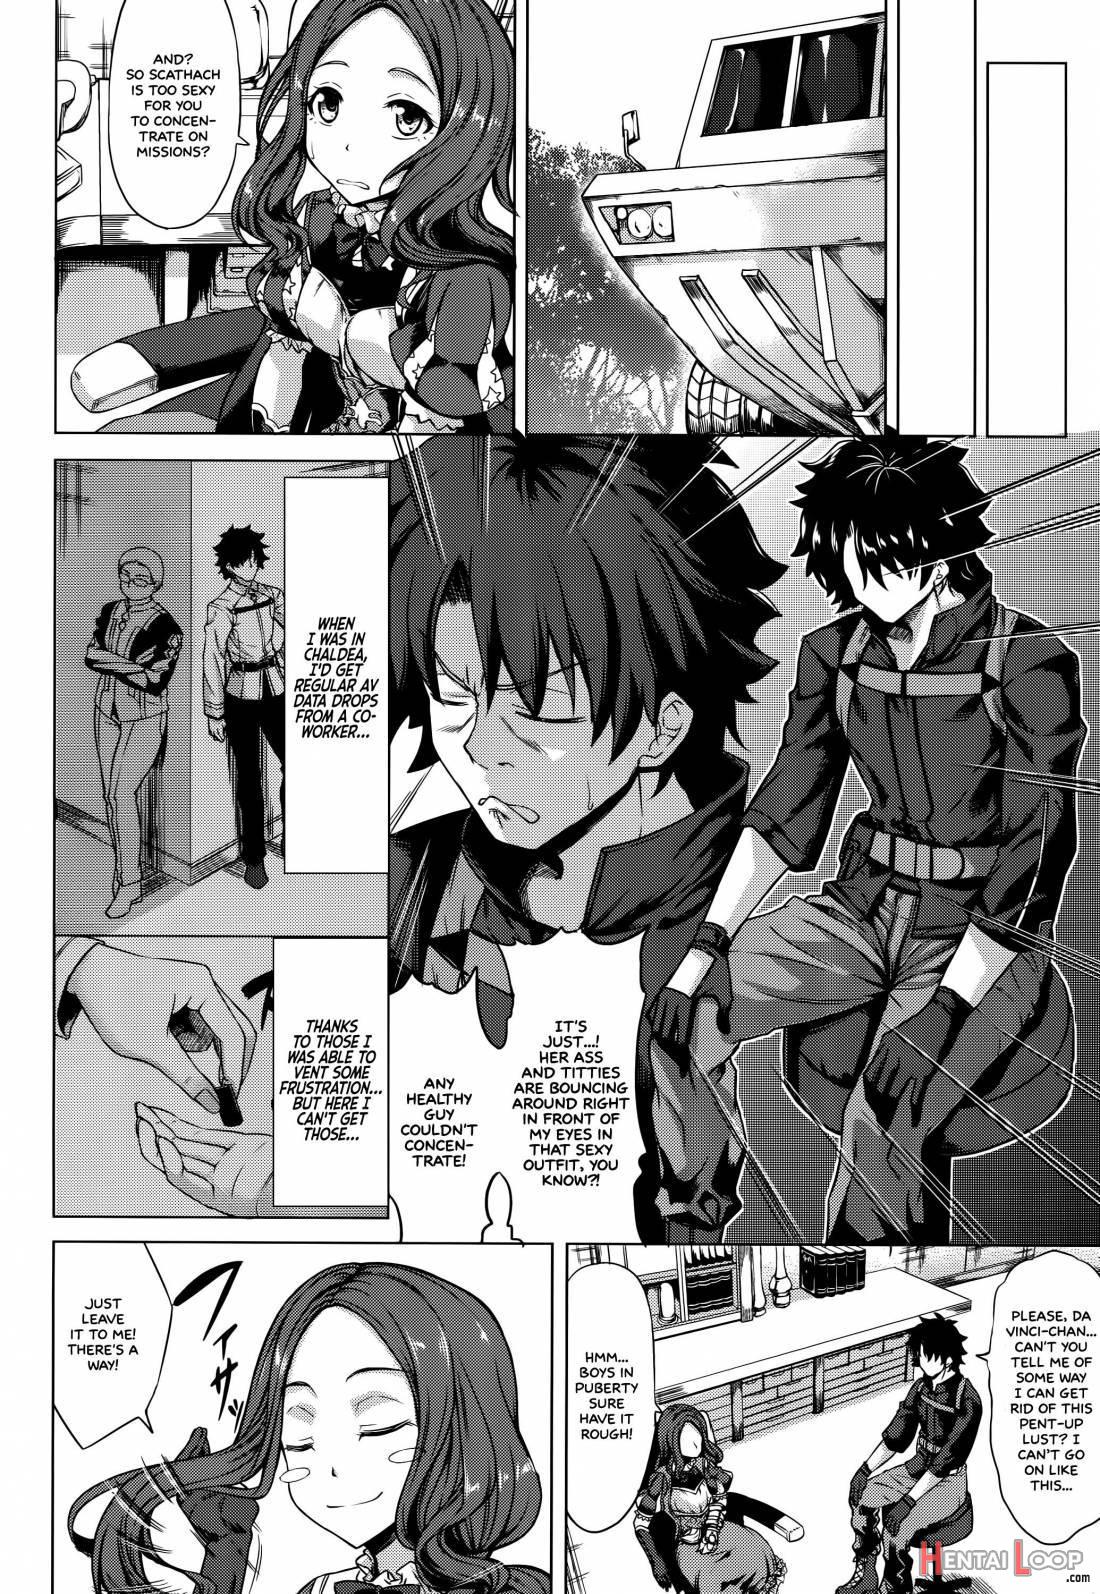 Scathach Zanmai page 3